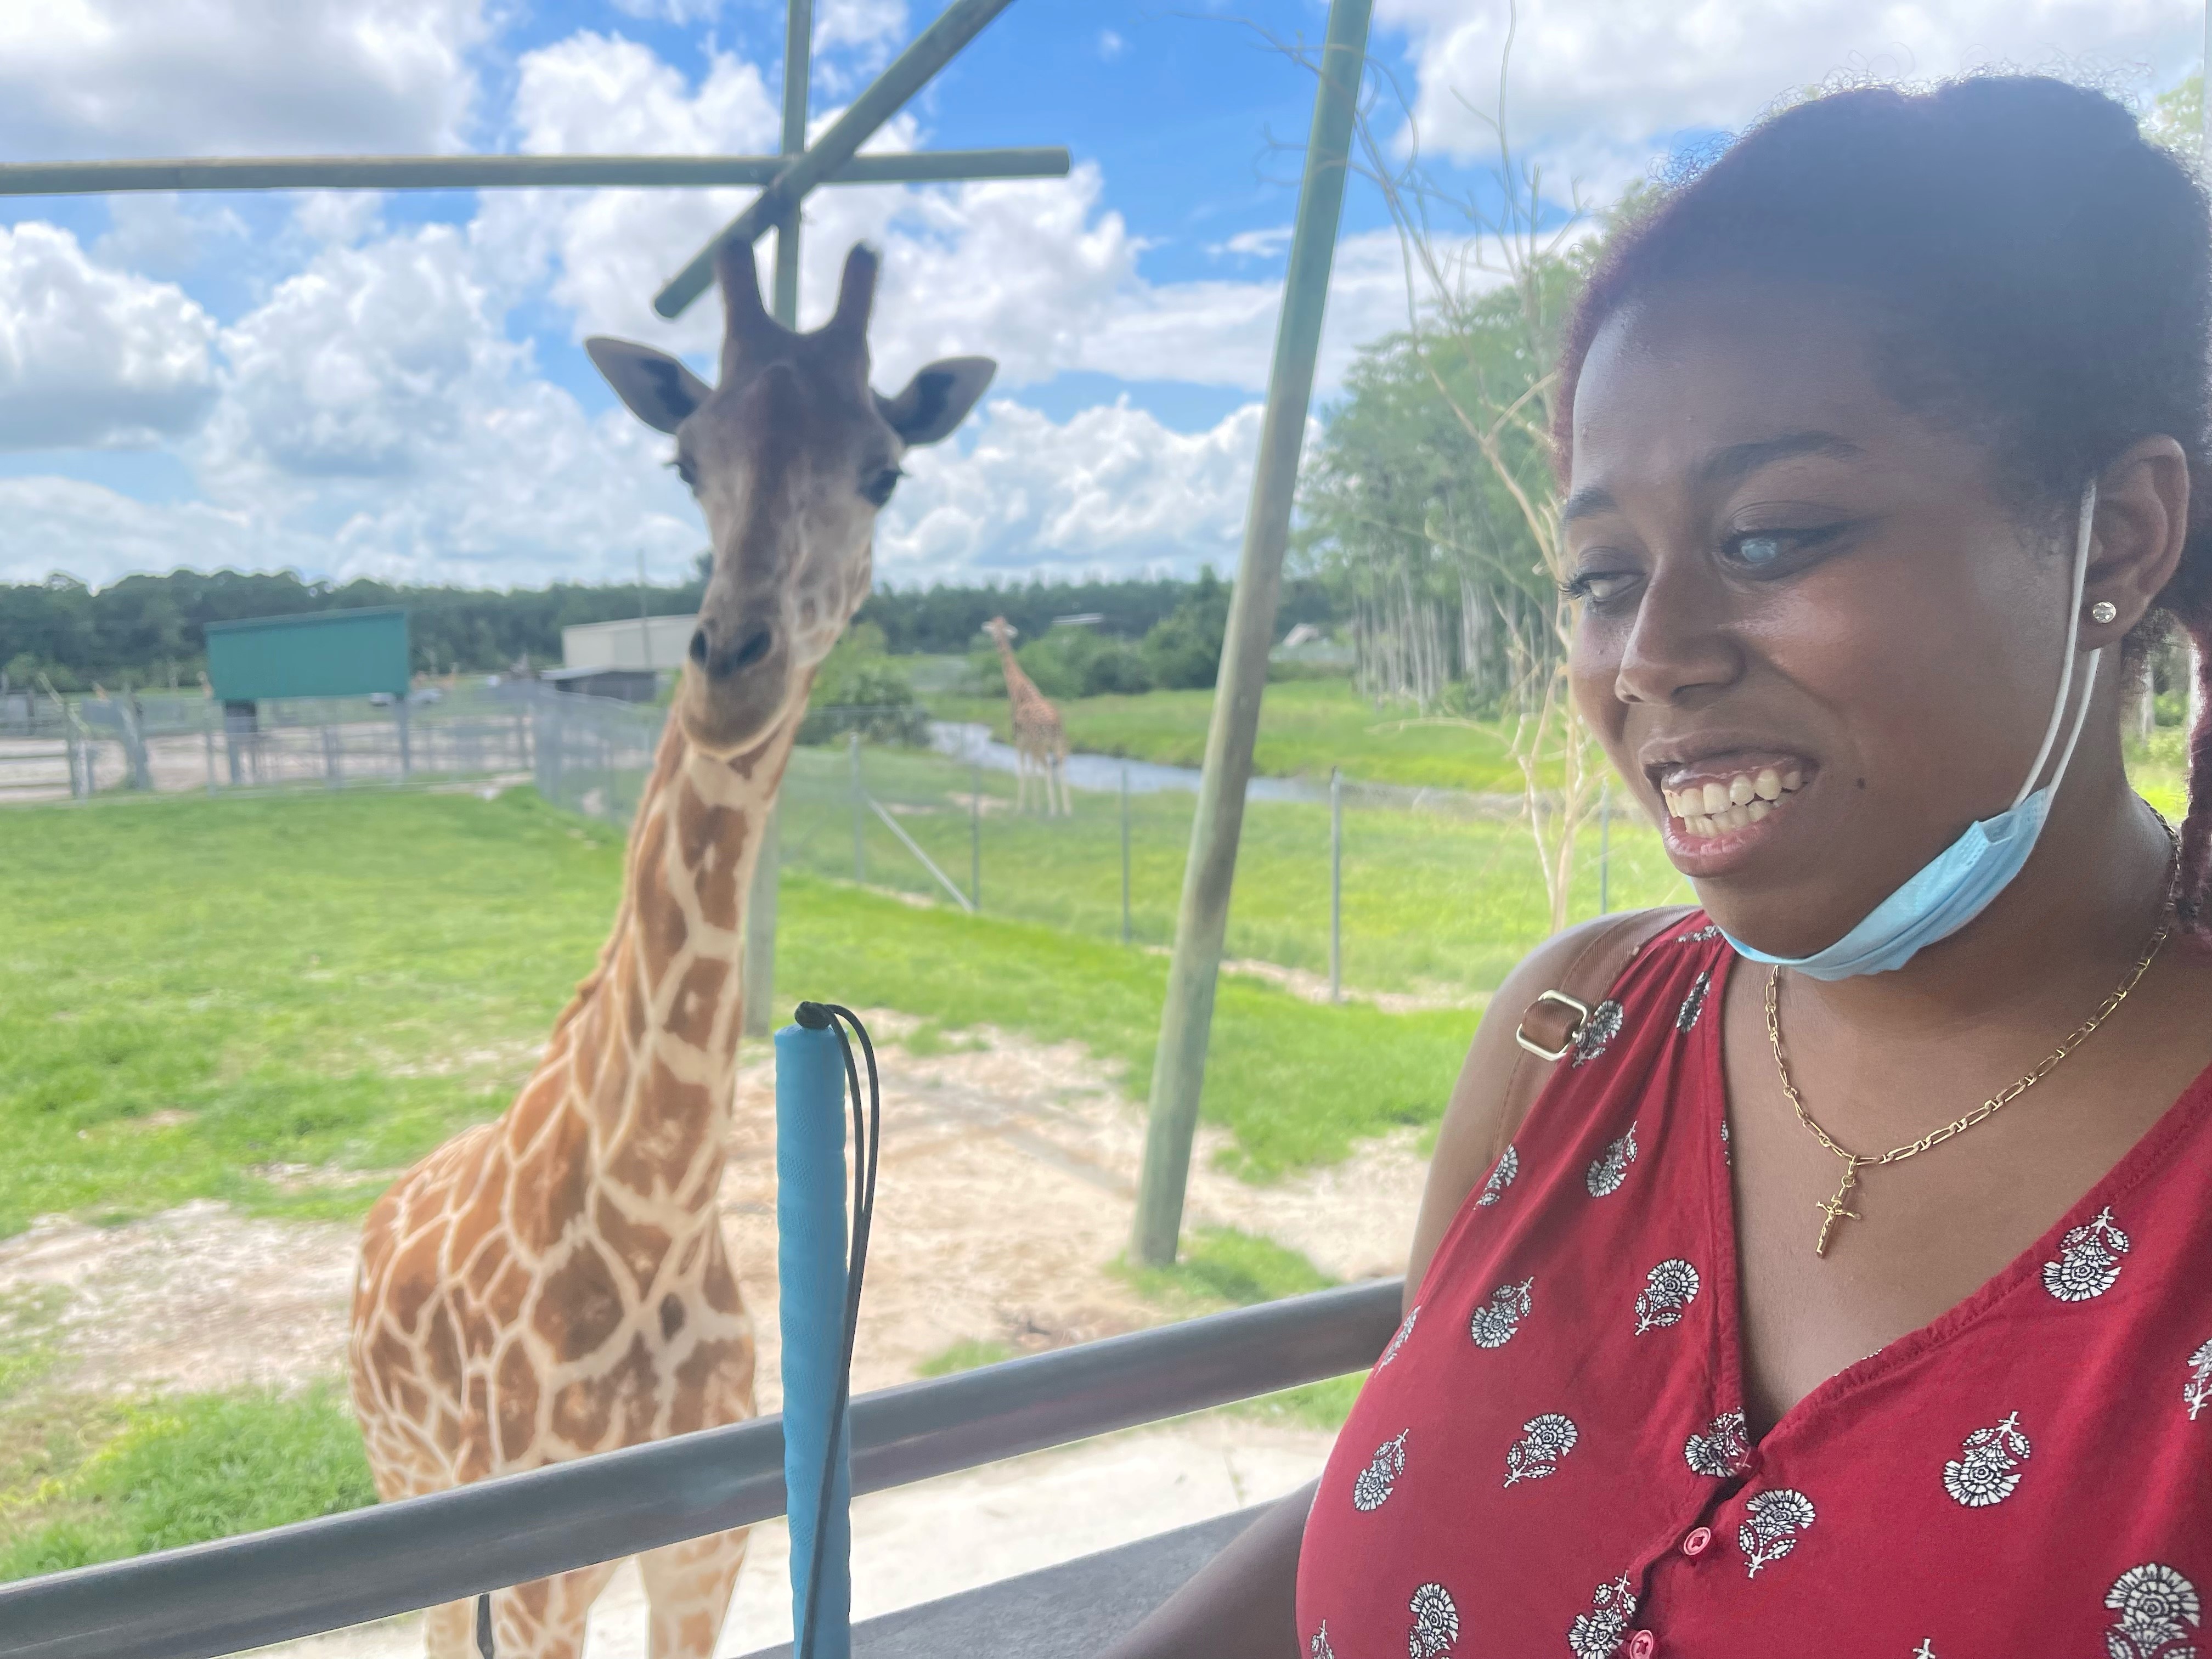 Blog writer, Lily Mordaunt, at a zoo in Fort Lauderdale, Florida with a giraffe. 